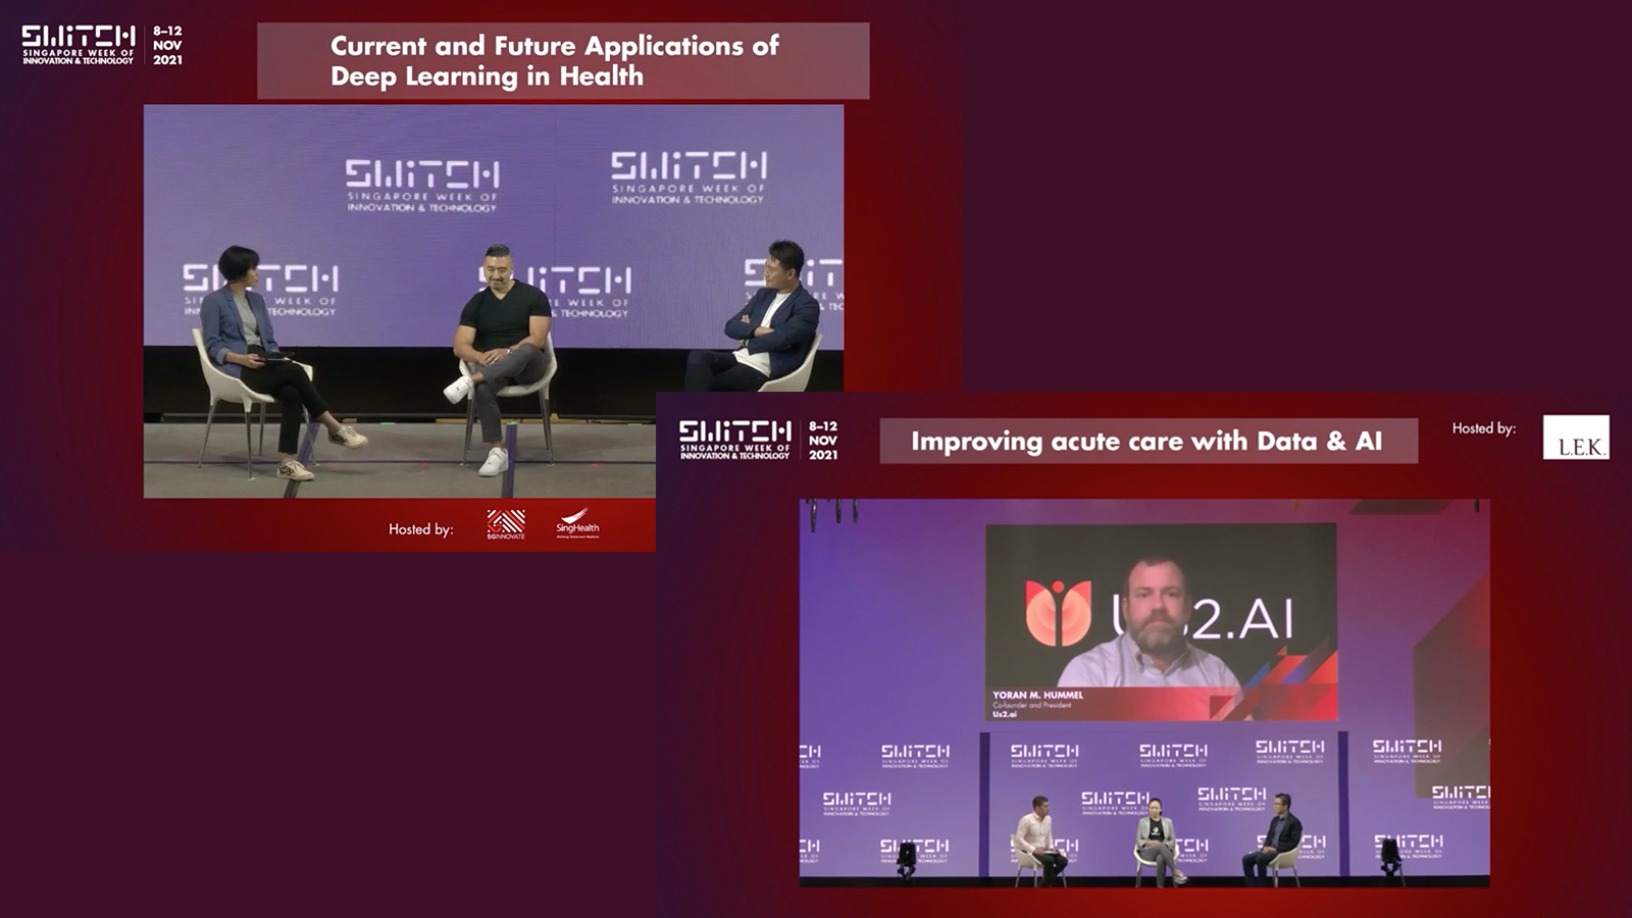 SWITCH Singapore 2021: Benefits and challenges of AI applications in healthcare